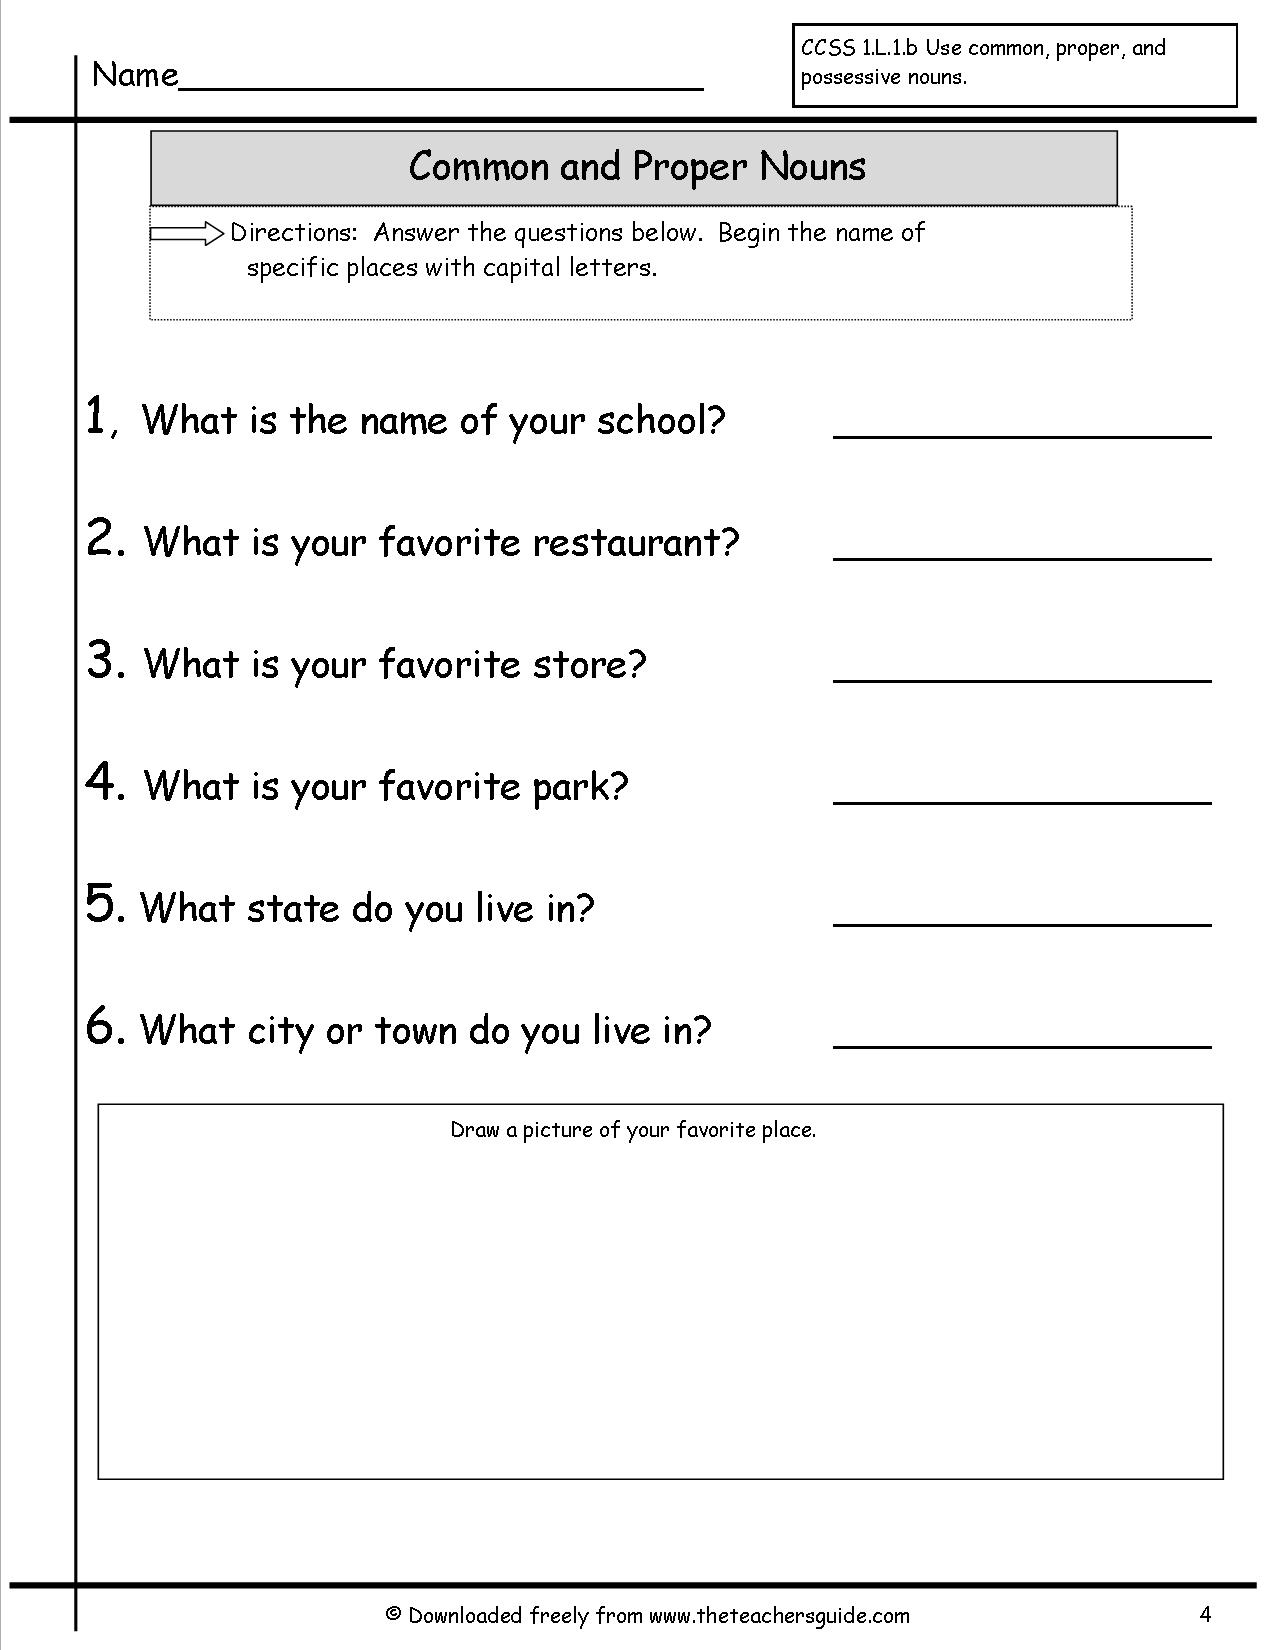 Common and Proper Nouns Worksheets Image